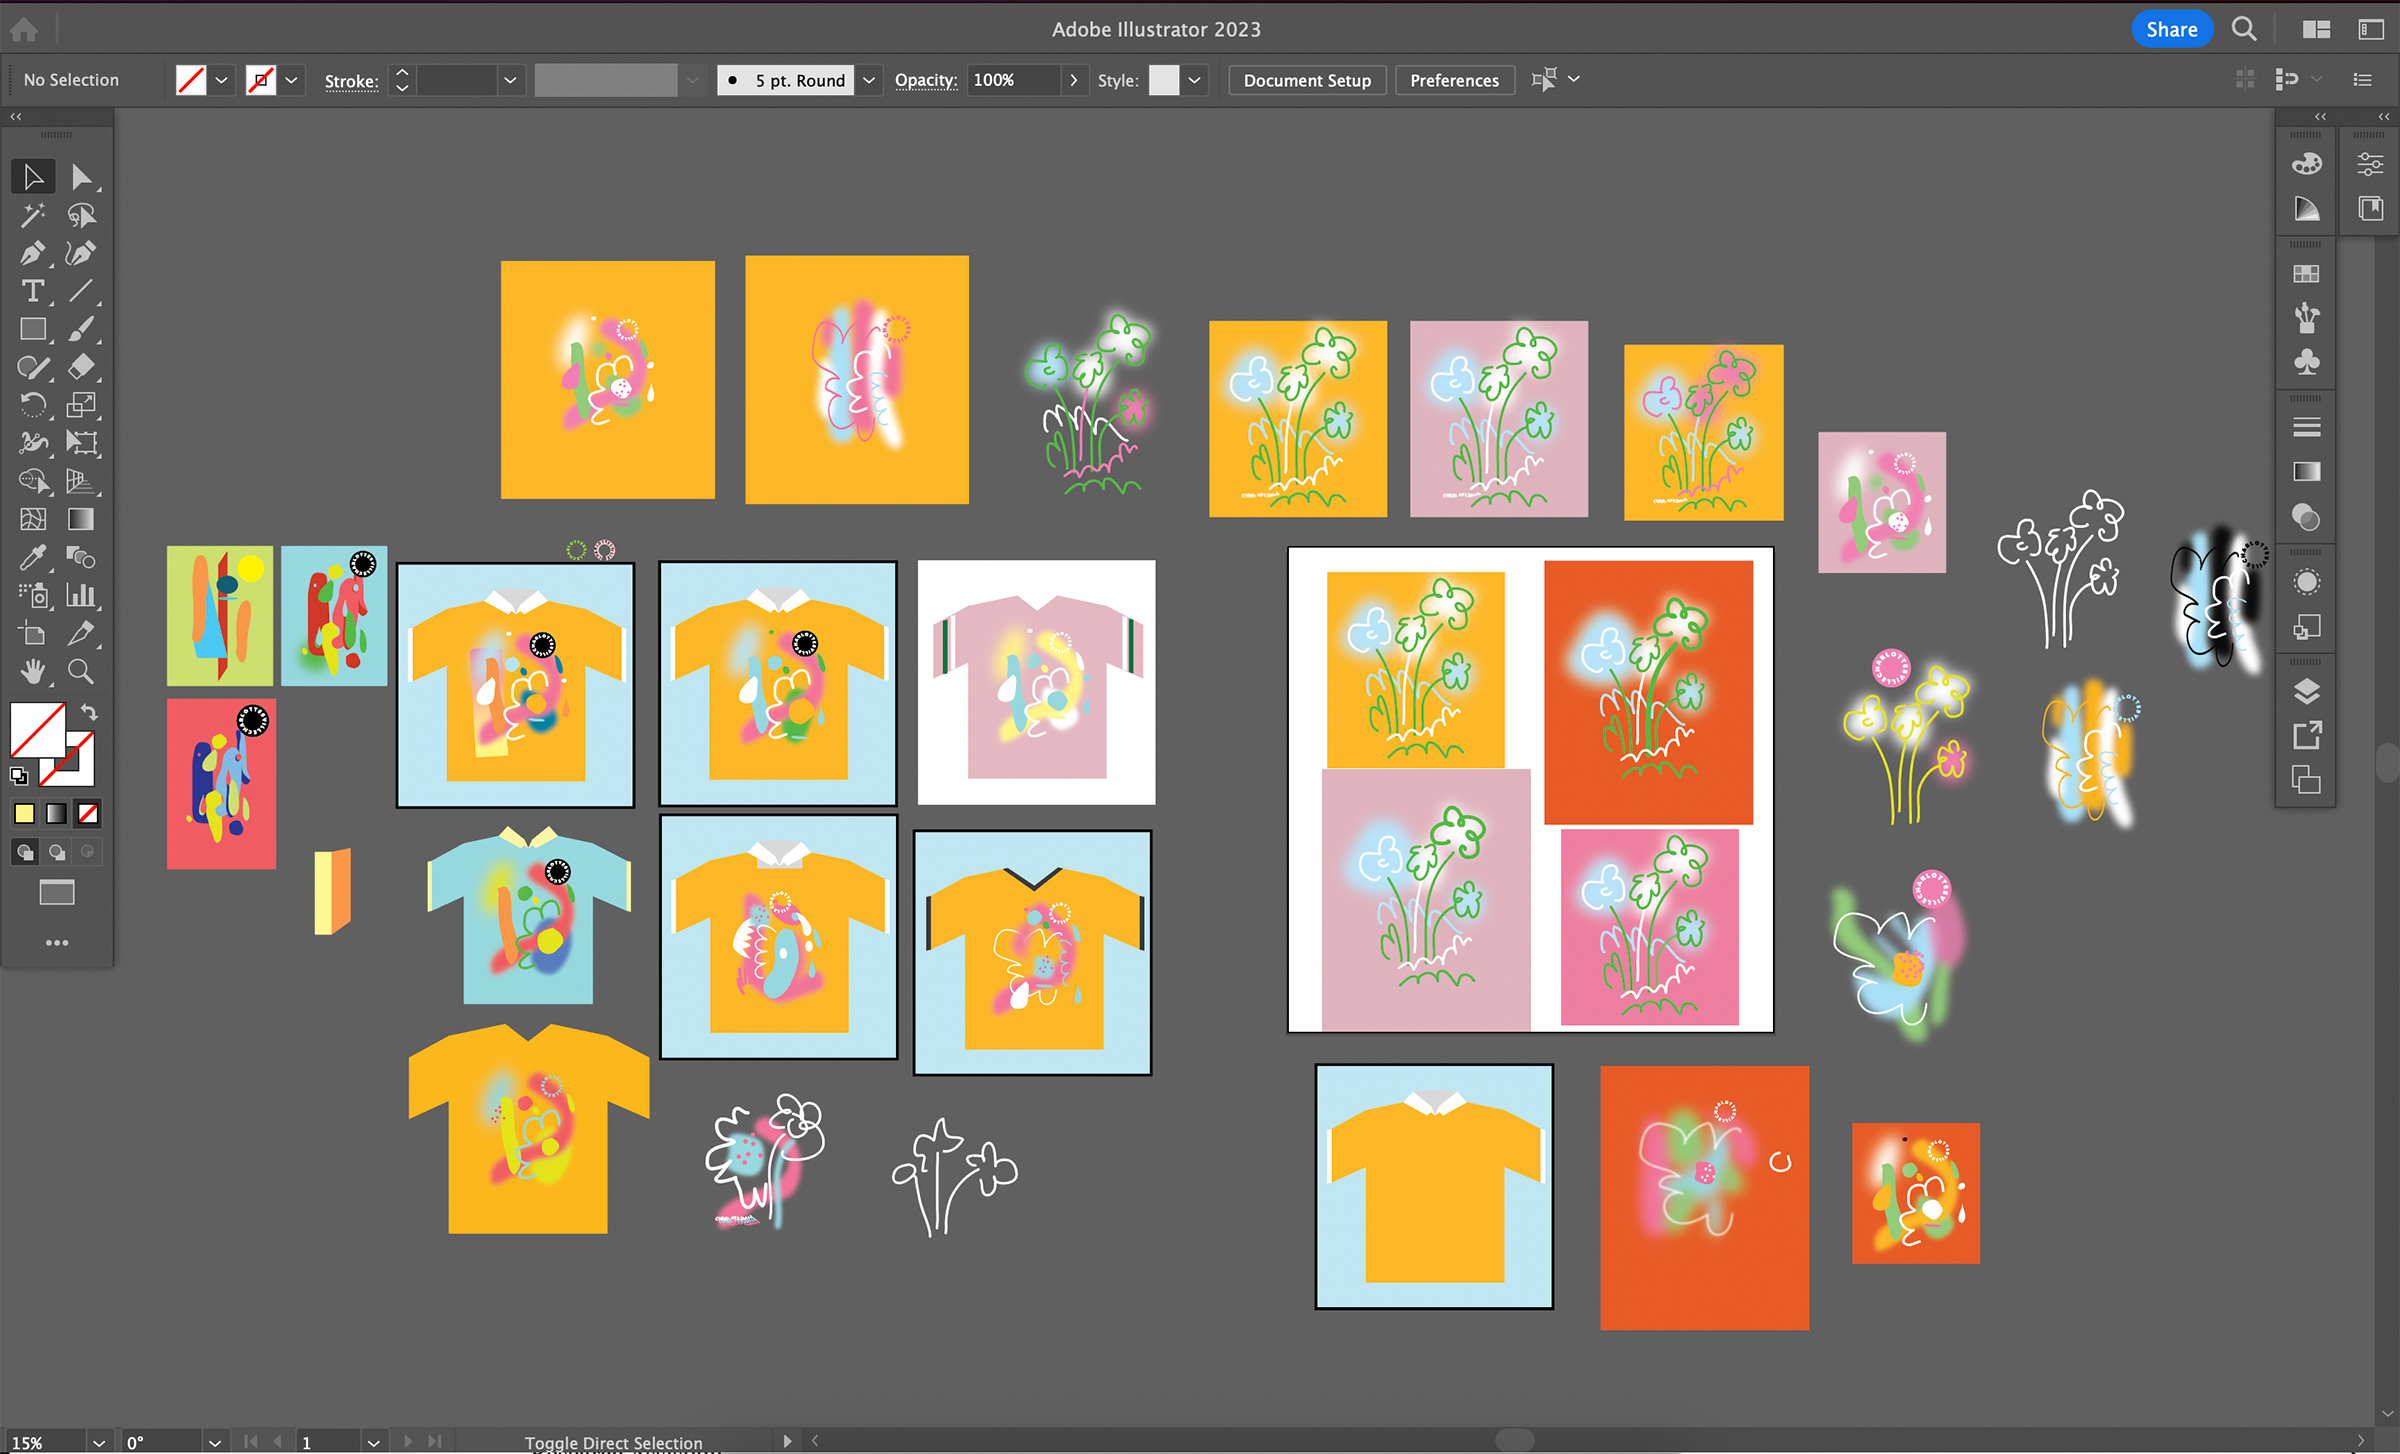 A screenshot of an Adobe Illustrator workspace featuring multiple floral designs, some on graphics of t-shirts.